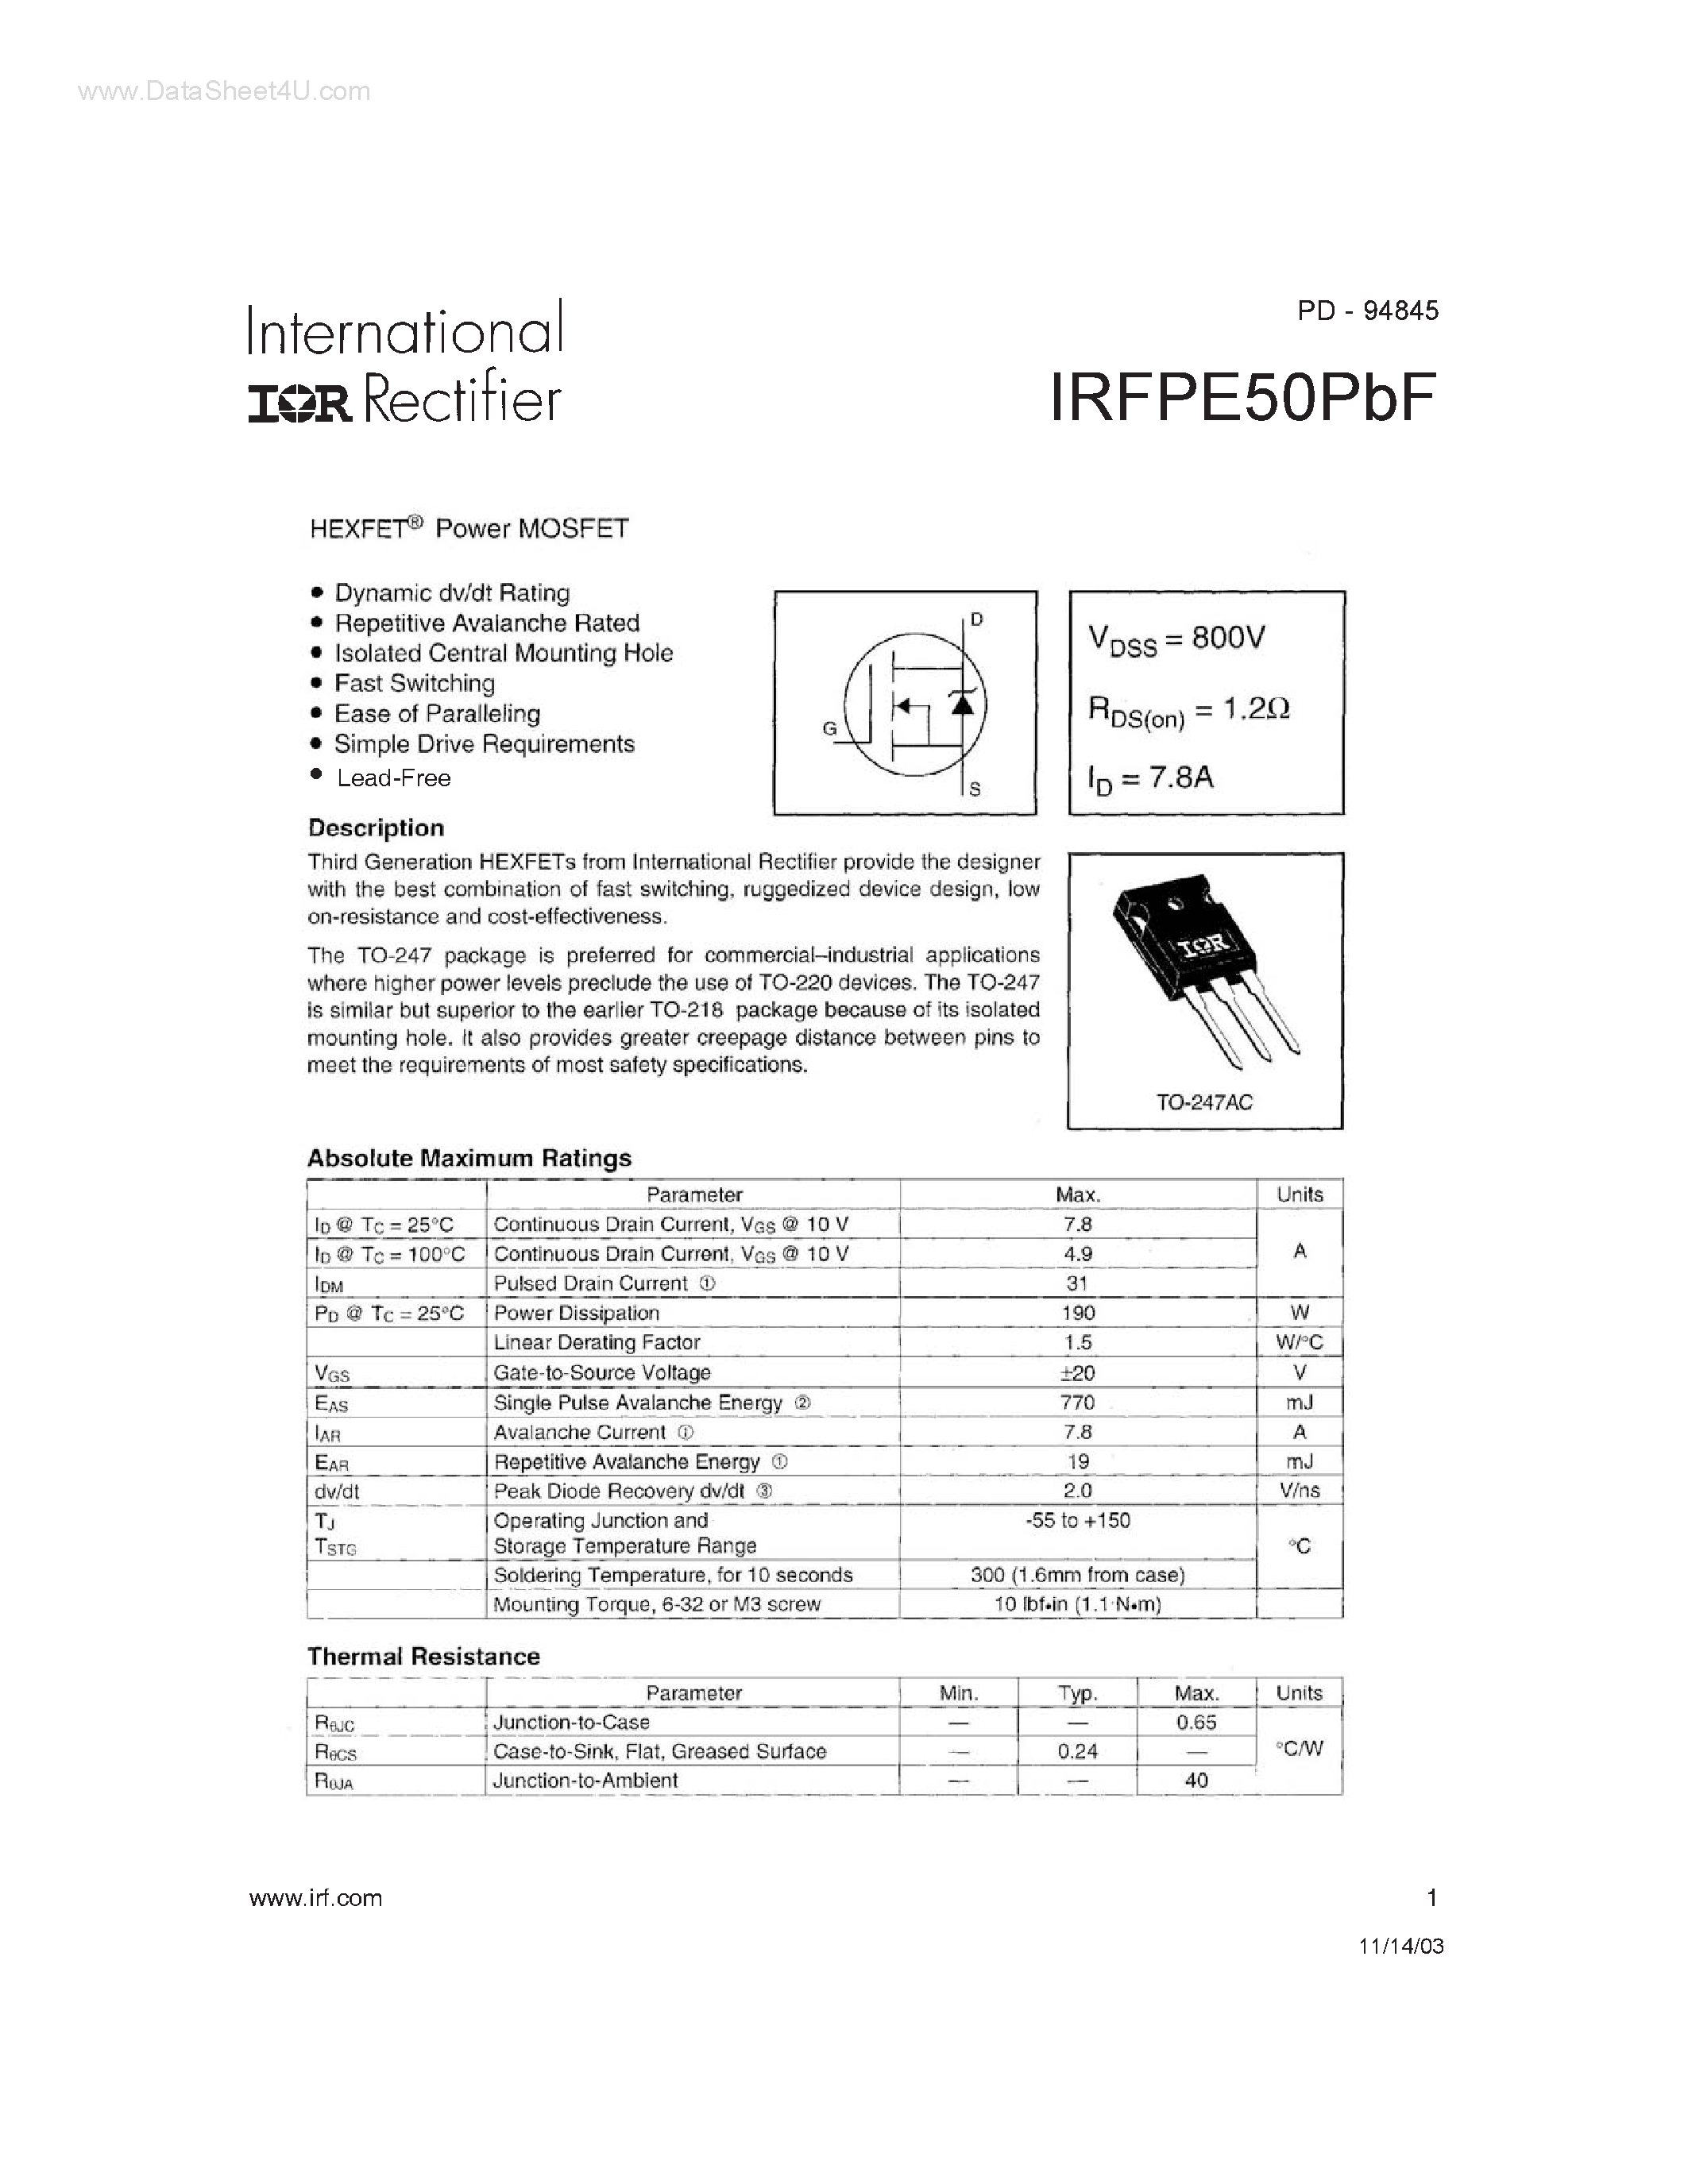 Datasheet IRFPE50PBF - Power MOSFET page 1